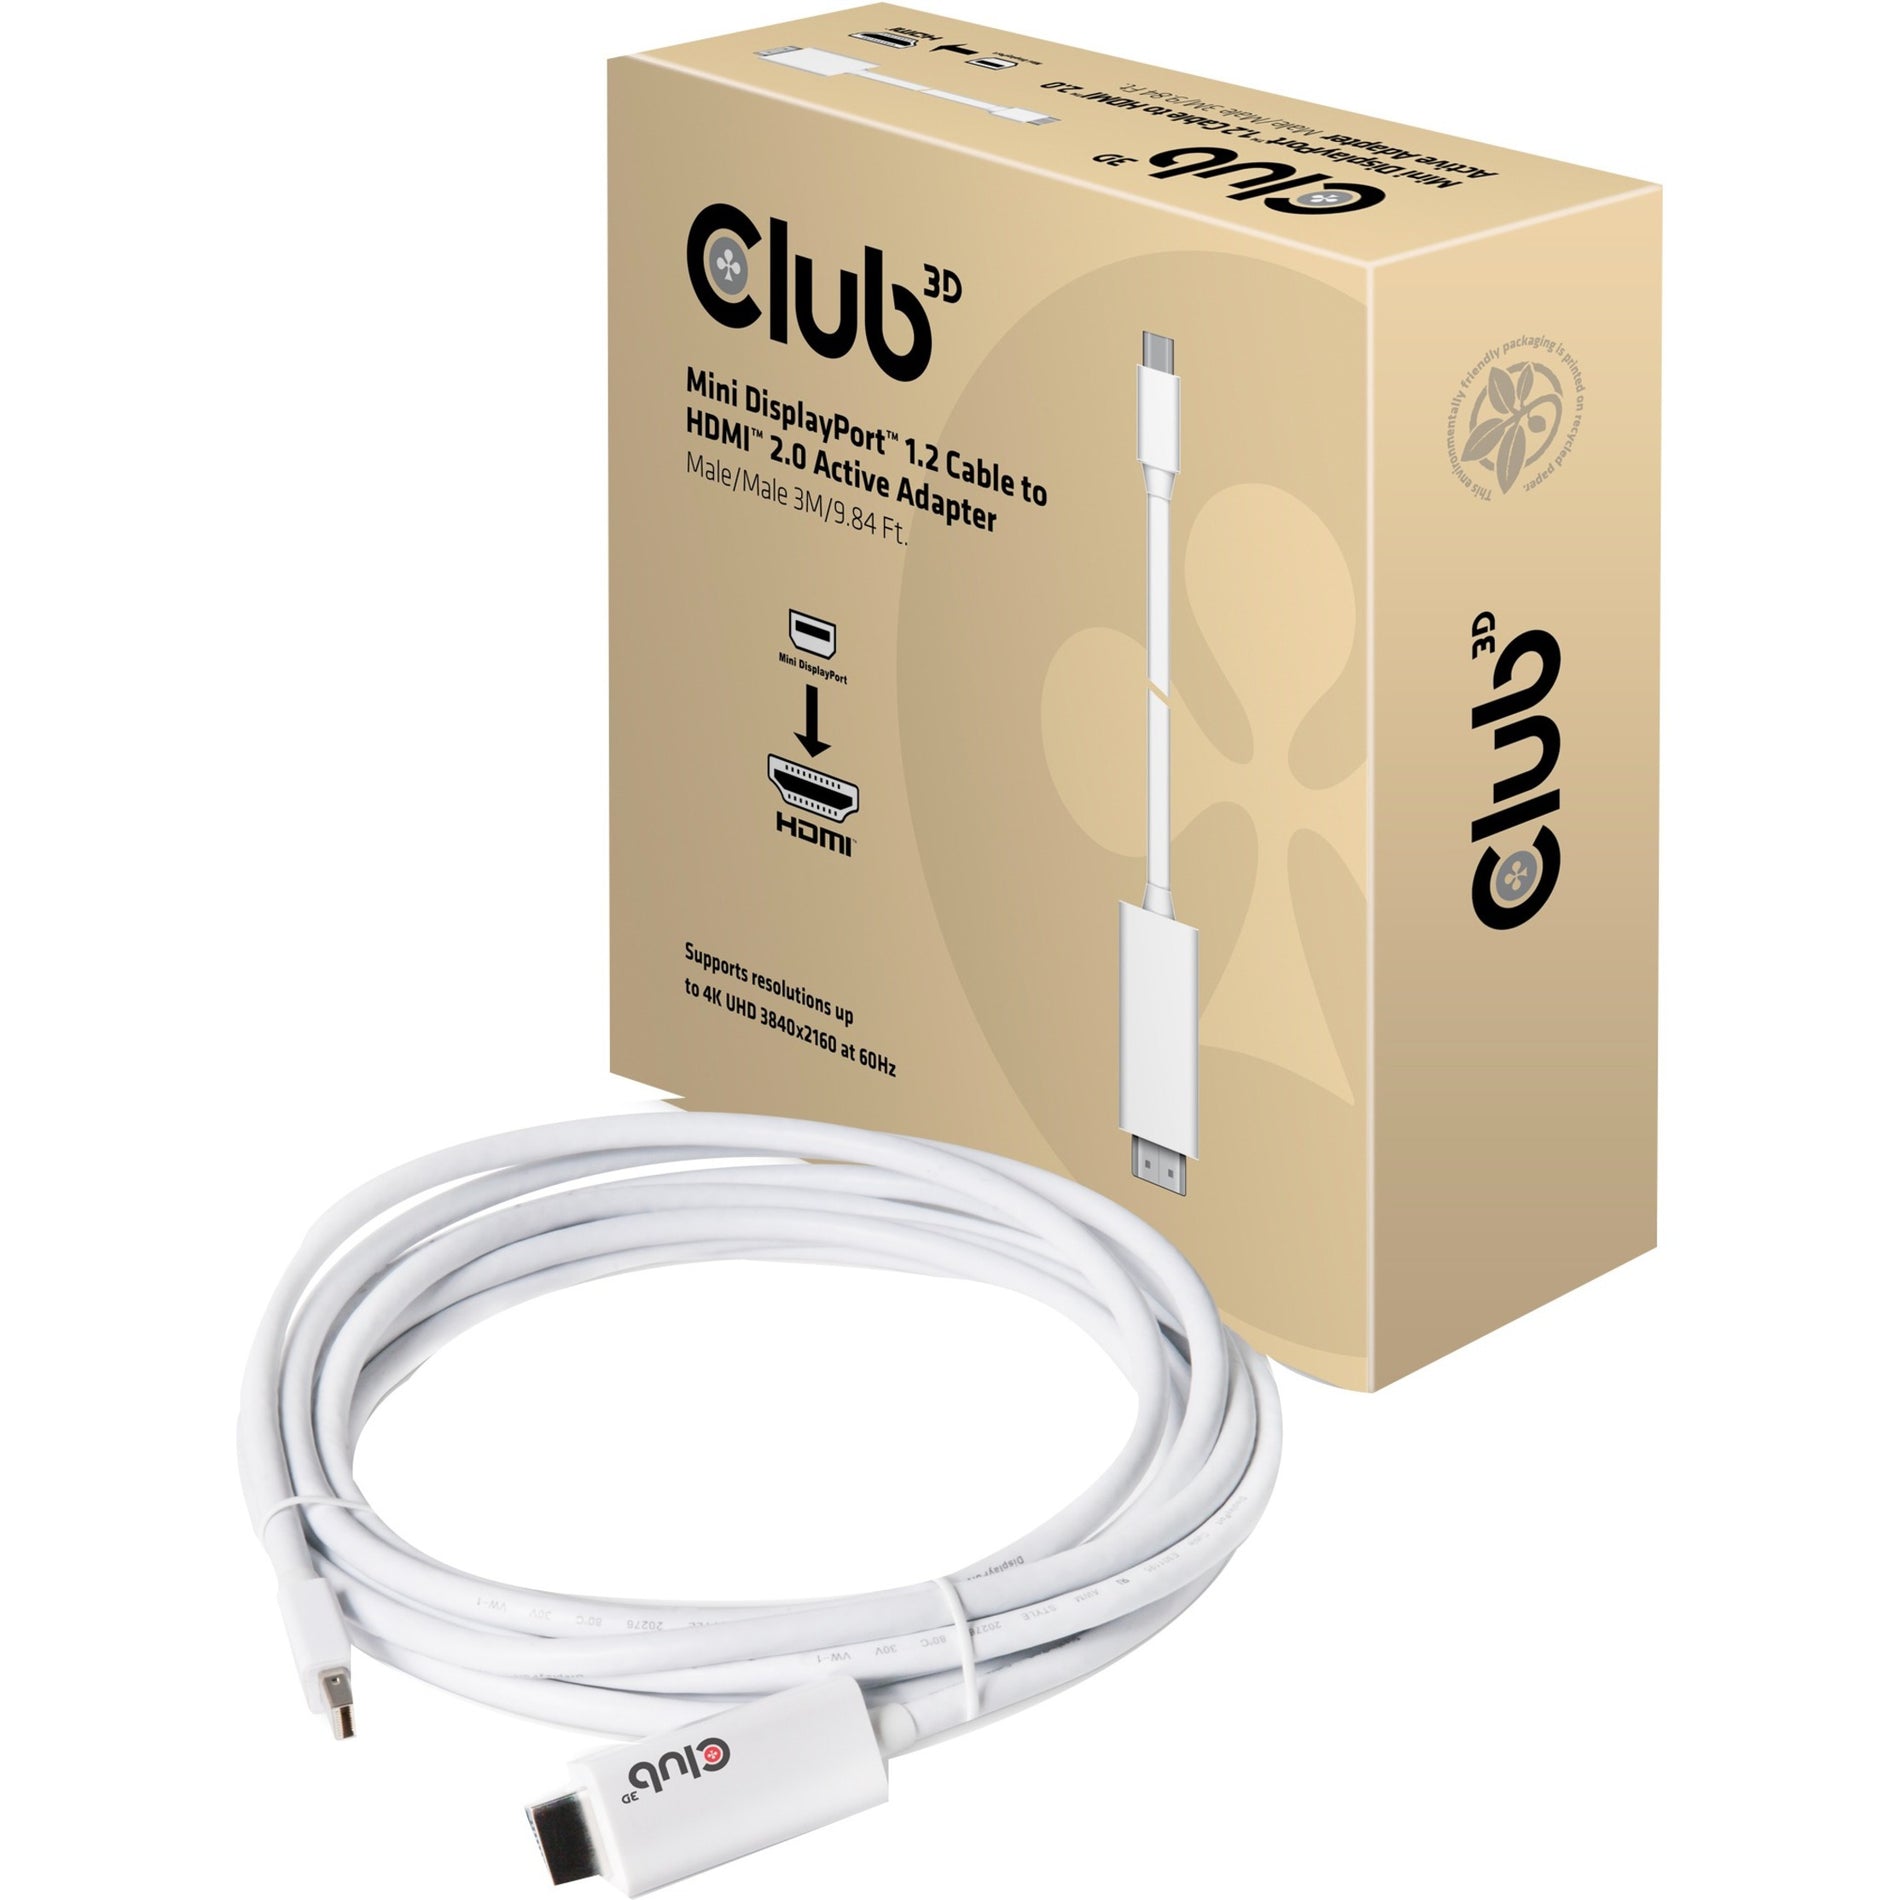 Club 3D CAC-1173 Mini DisplayPort 1.2 Cable to HDMI UHD 4K60Hz Active Adapter M/M 3m/9.84Ft, High-Quality Audio/Video Connection